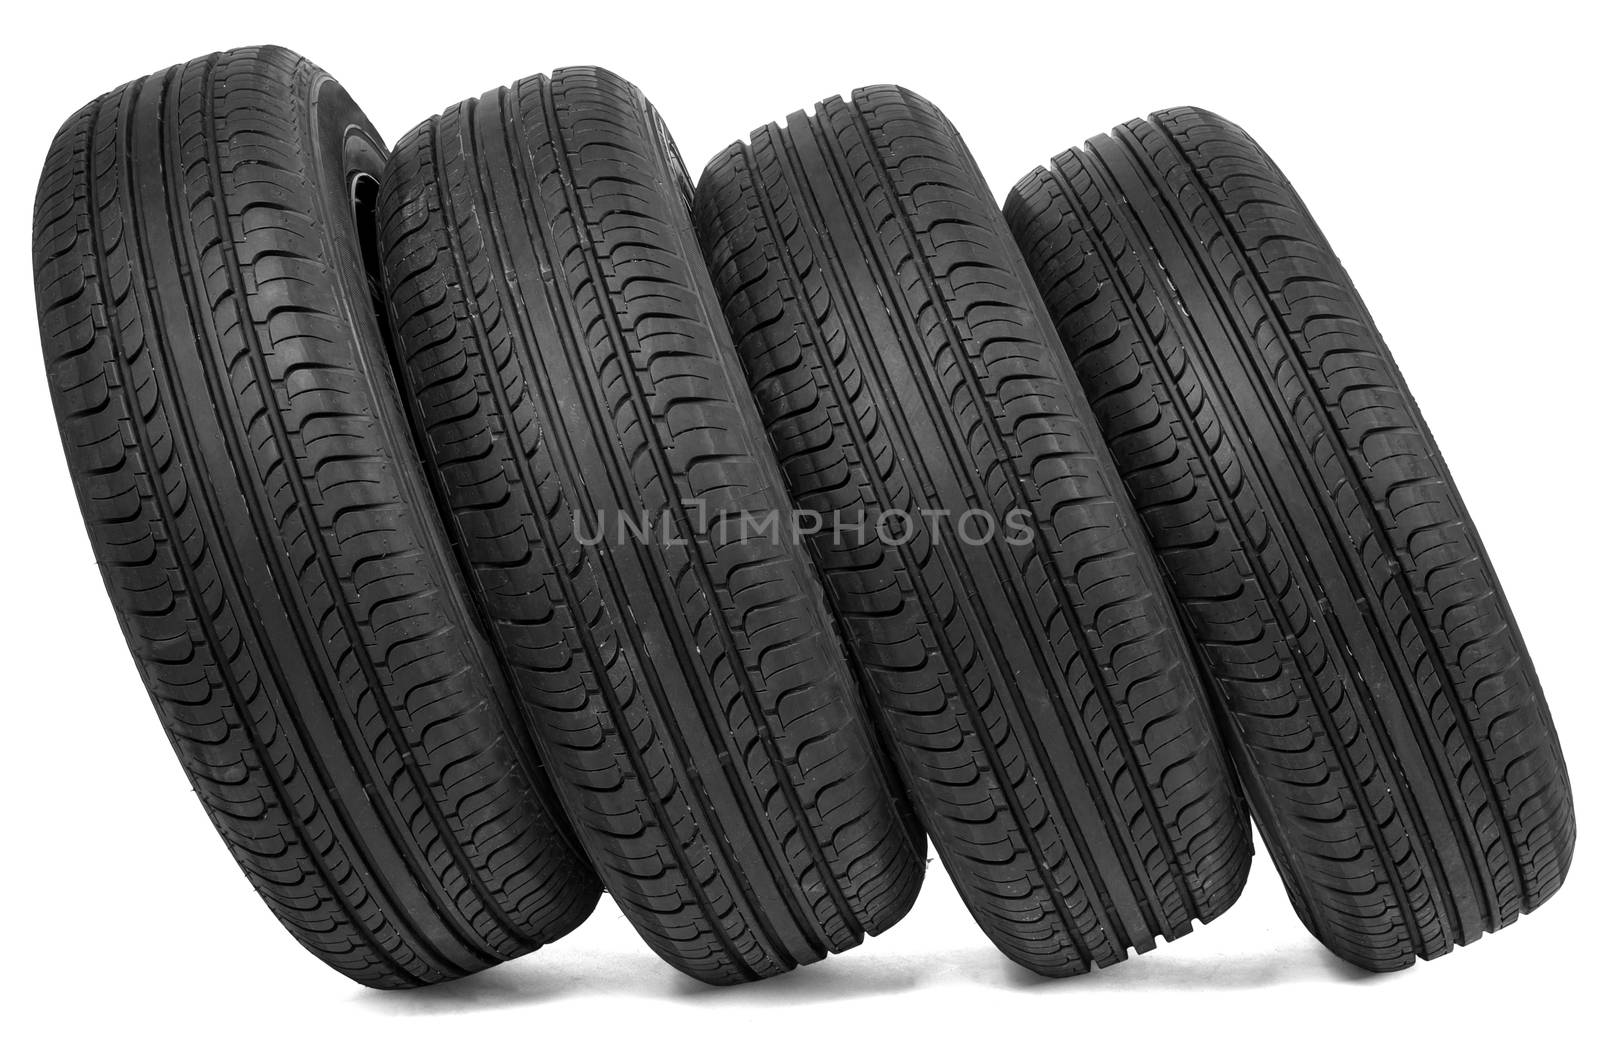 Stack of car wheels. Isolated on white background